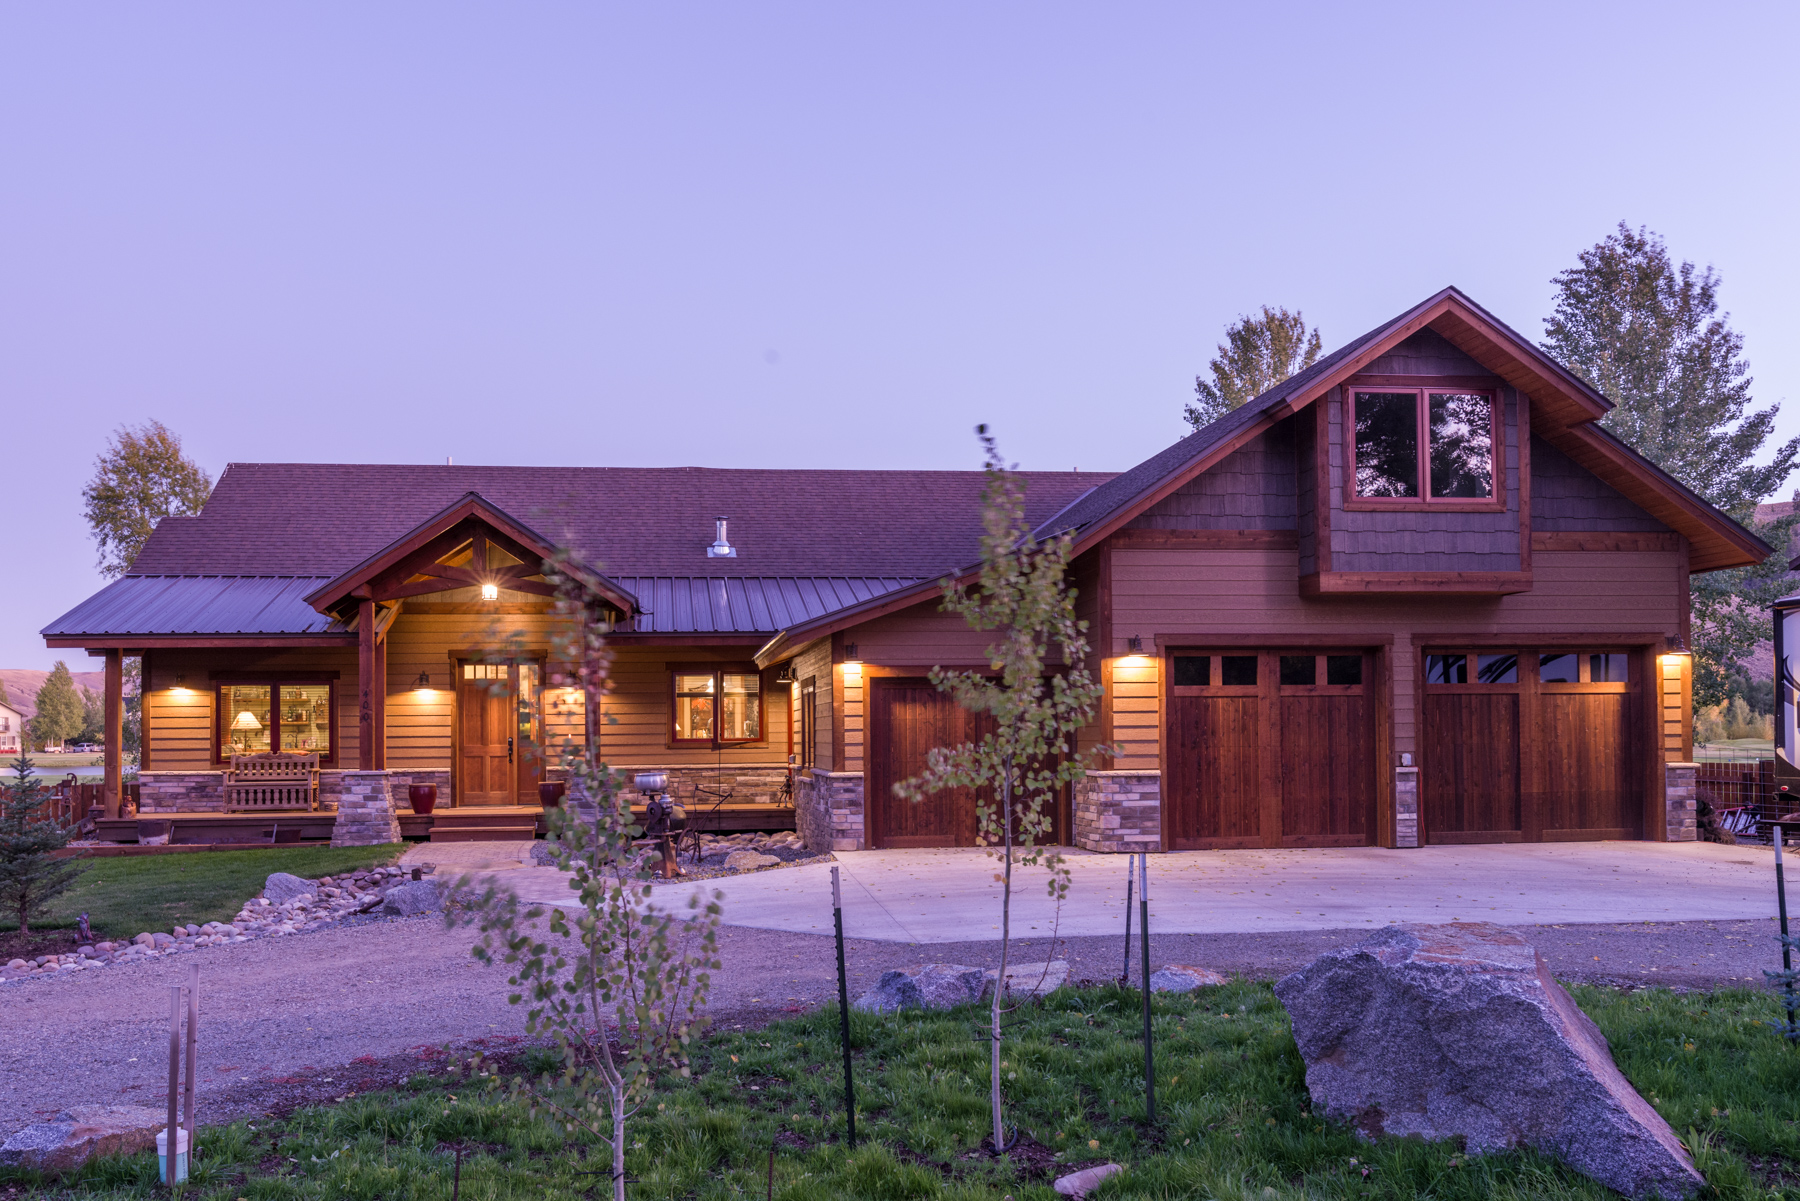 Check out our custom gunnison MacAllister Residence Build!